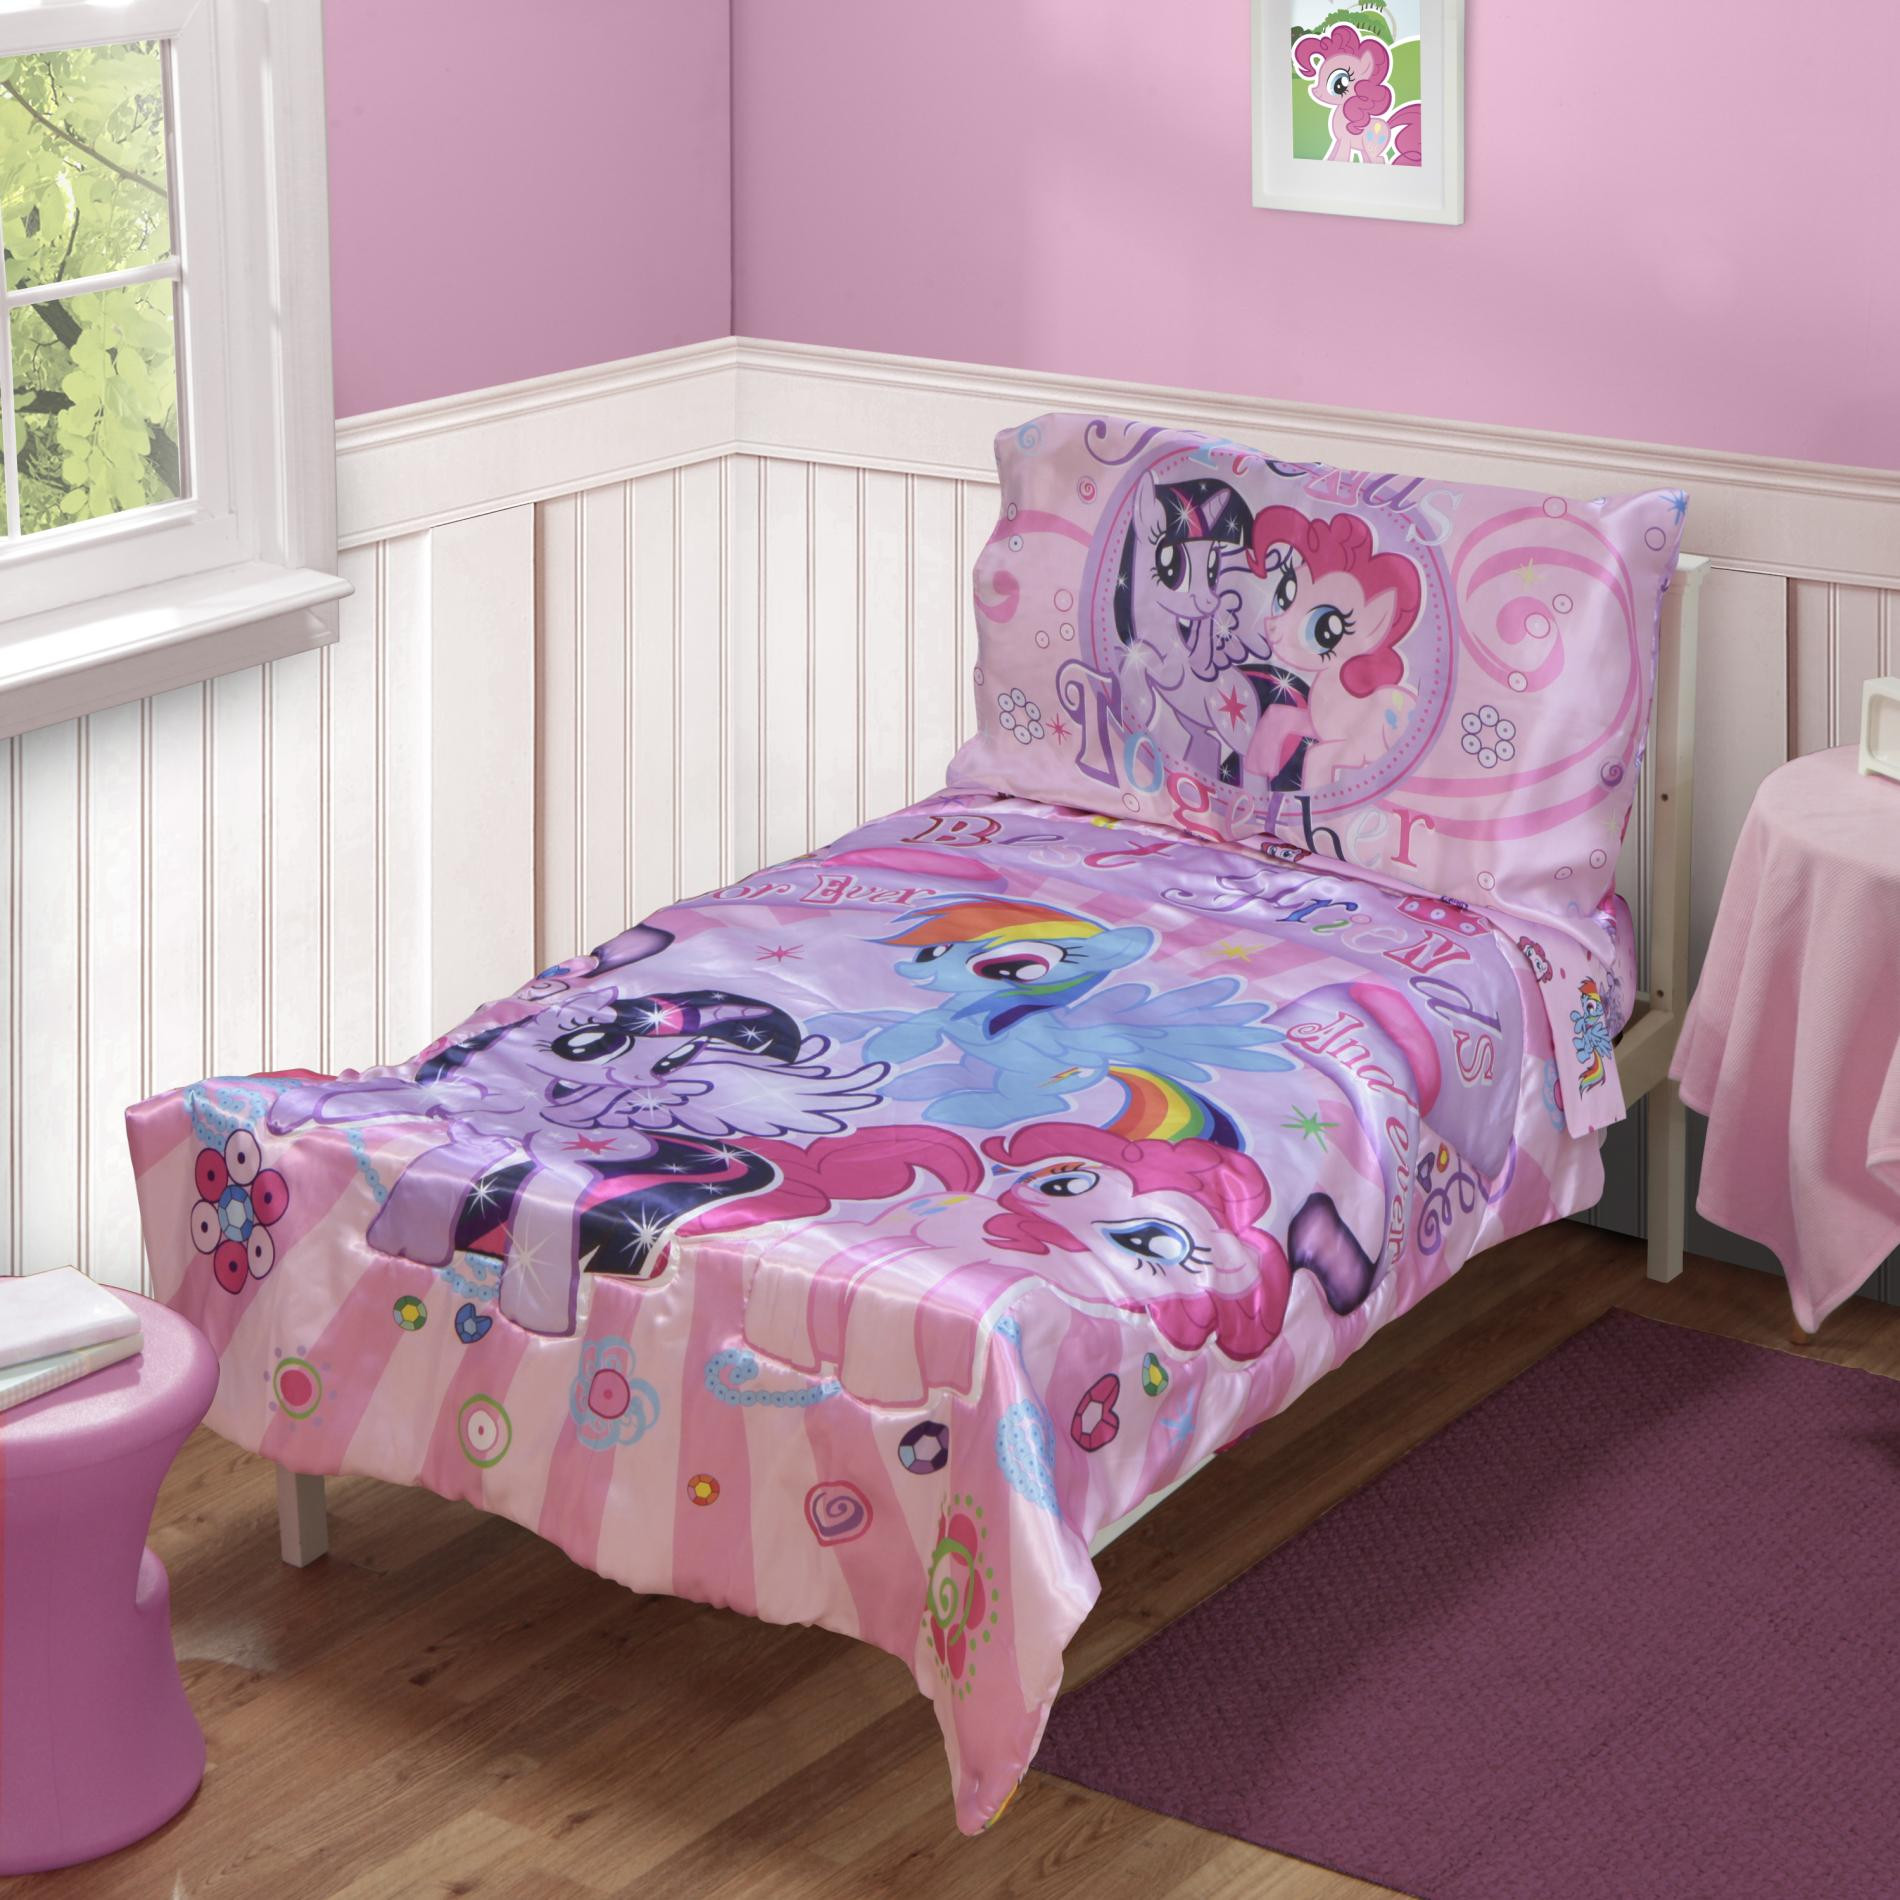 20 Insanely Gorgeous My Little Pony Bedroom Decorations - Home, Family